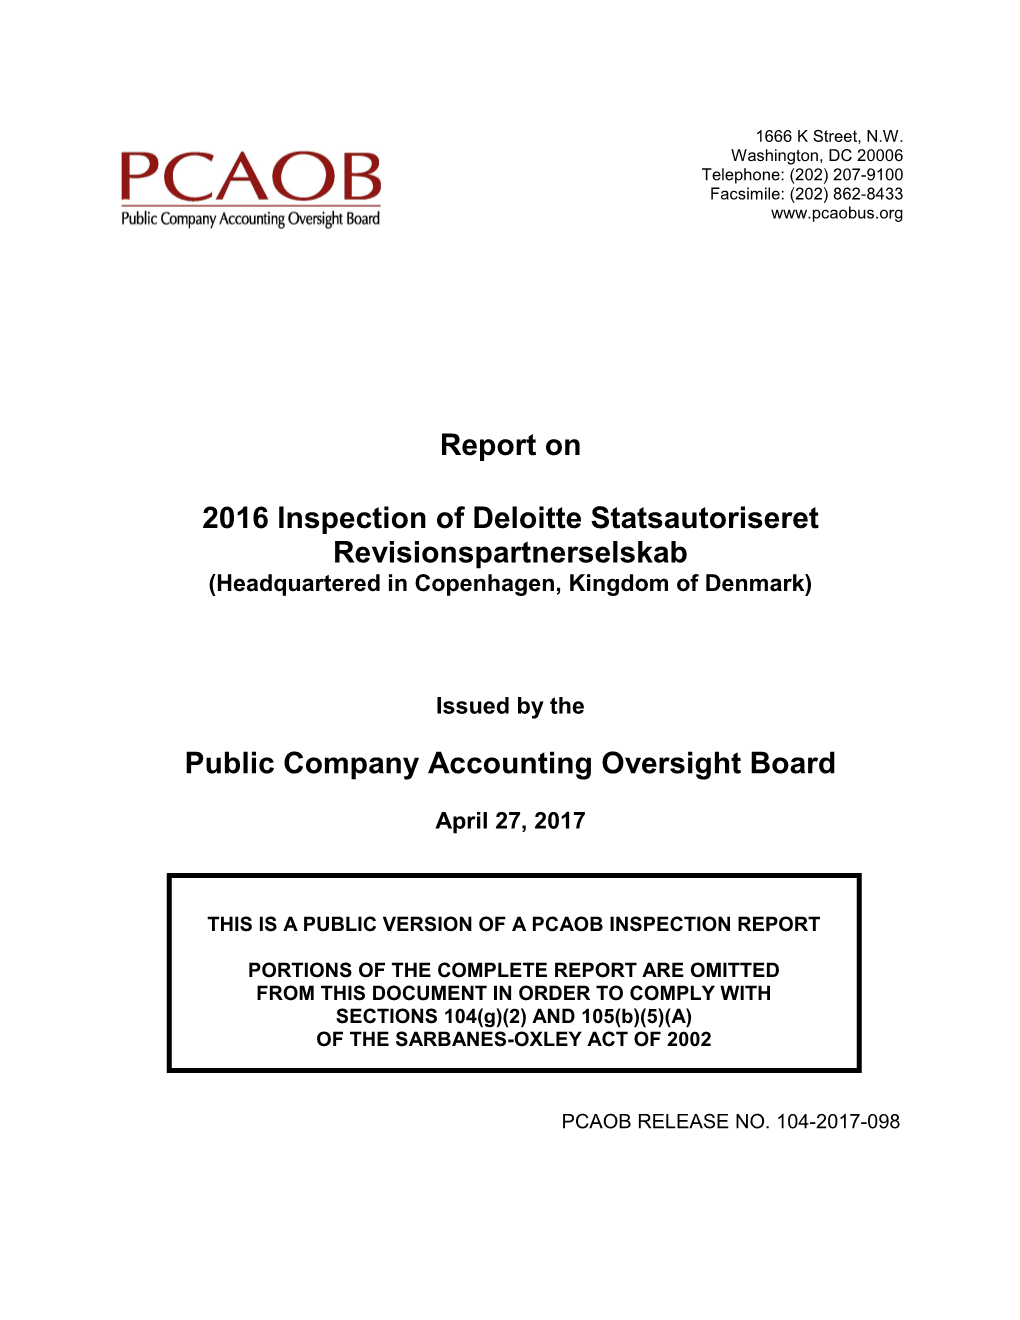 Report on 2016 Inspection of Deloitte Statsautoriseret Revisionspartnerselskab Public Company Accounting Oversight Board